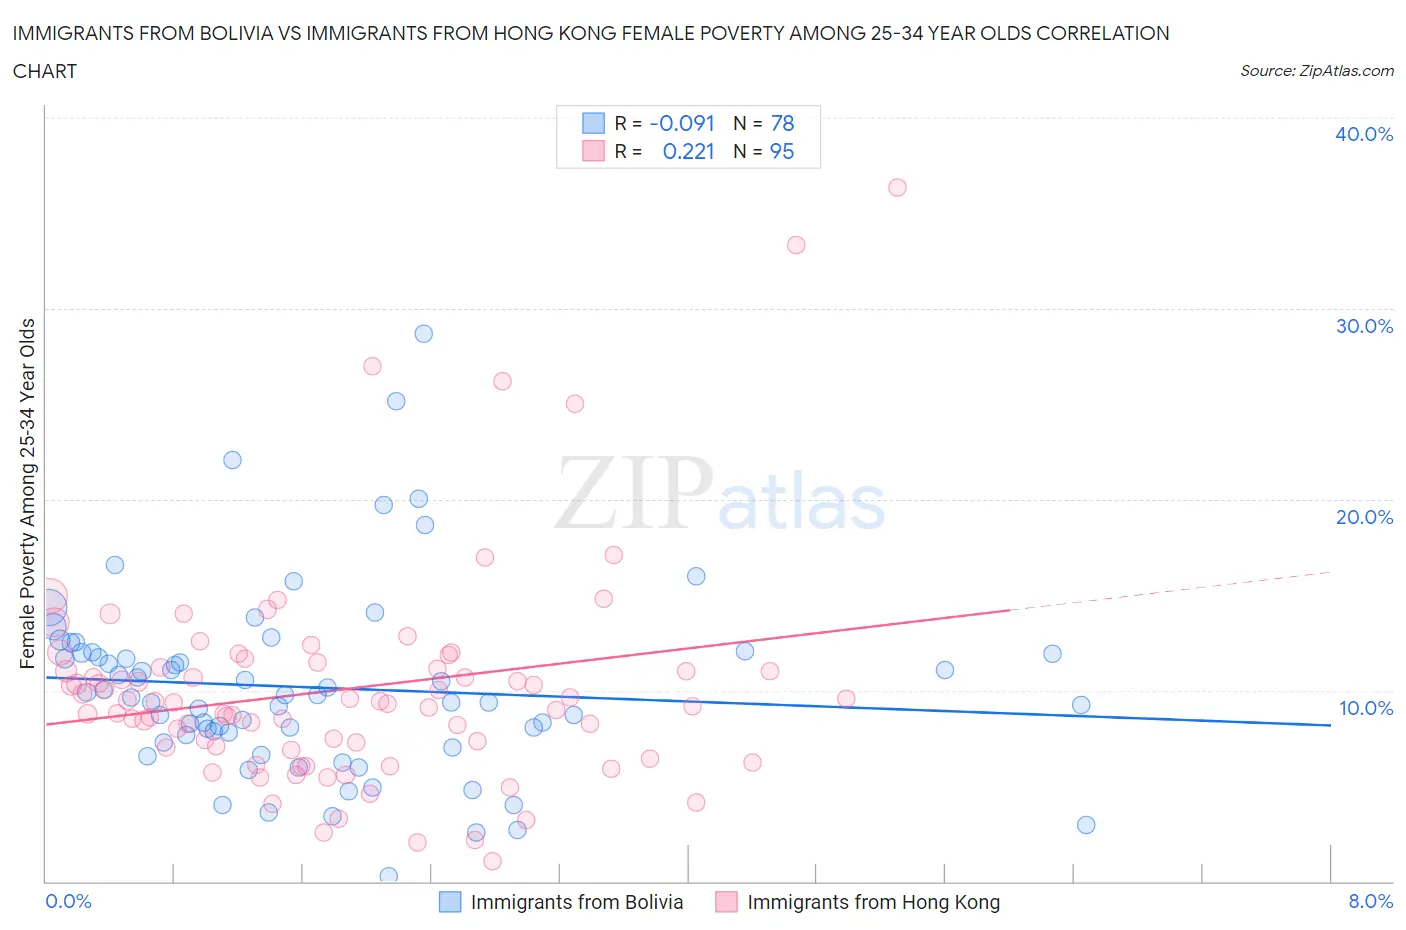 Immigrants from Bolivia vs Immigrants from Hong Kong Female Poverty Among 25-34 Year Olds